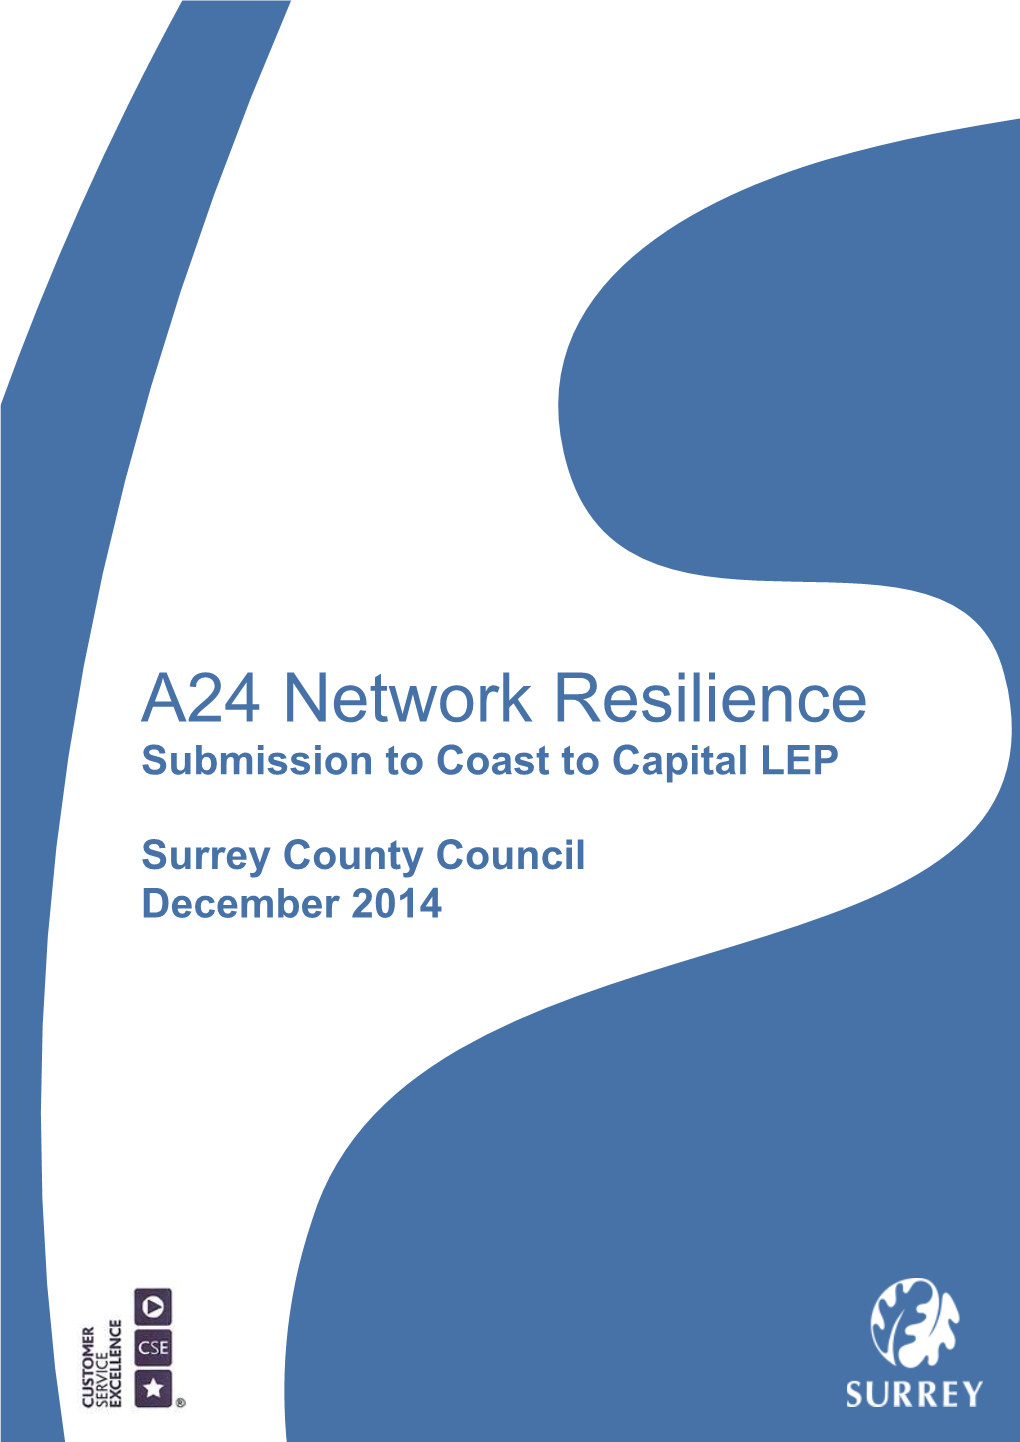 A24 Network Resilience Submission to Coast to Capital LEP